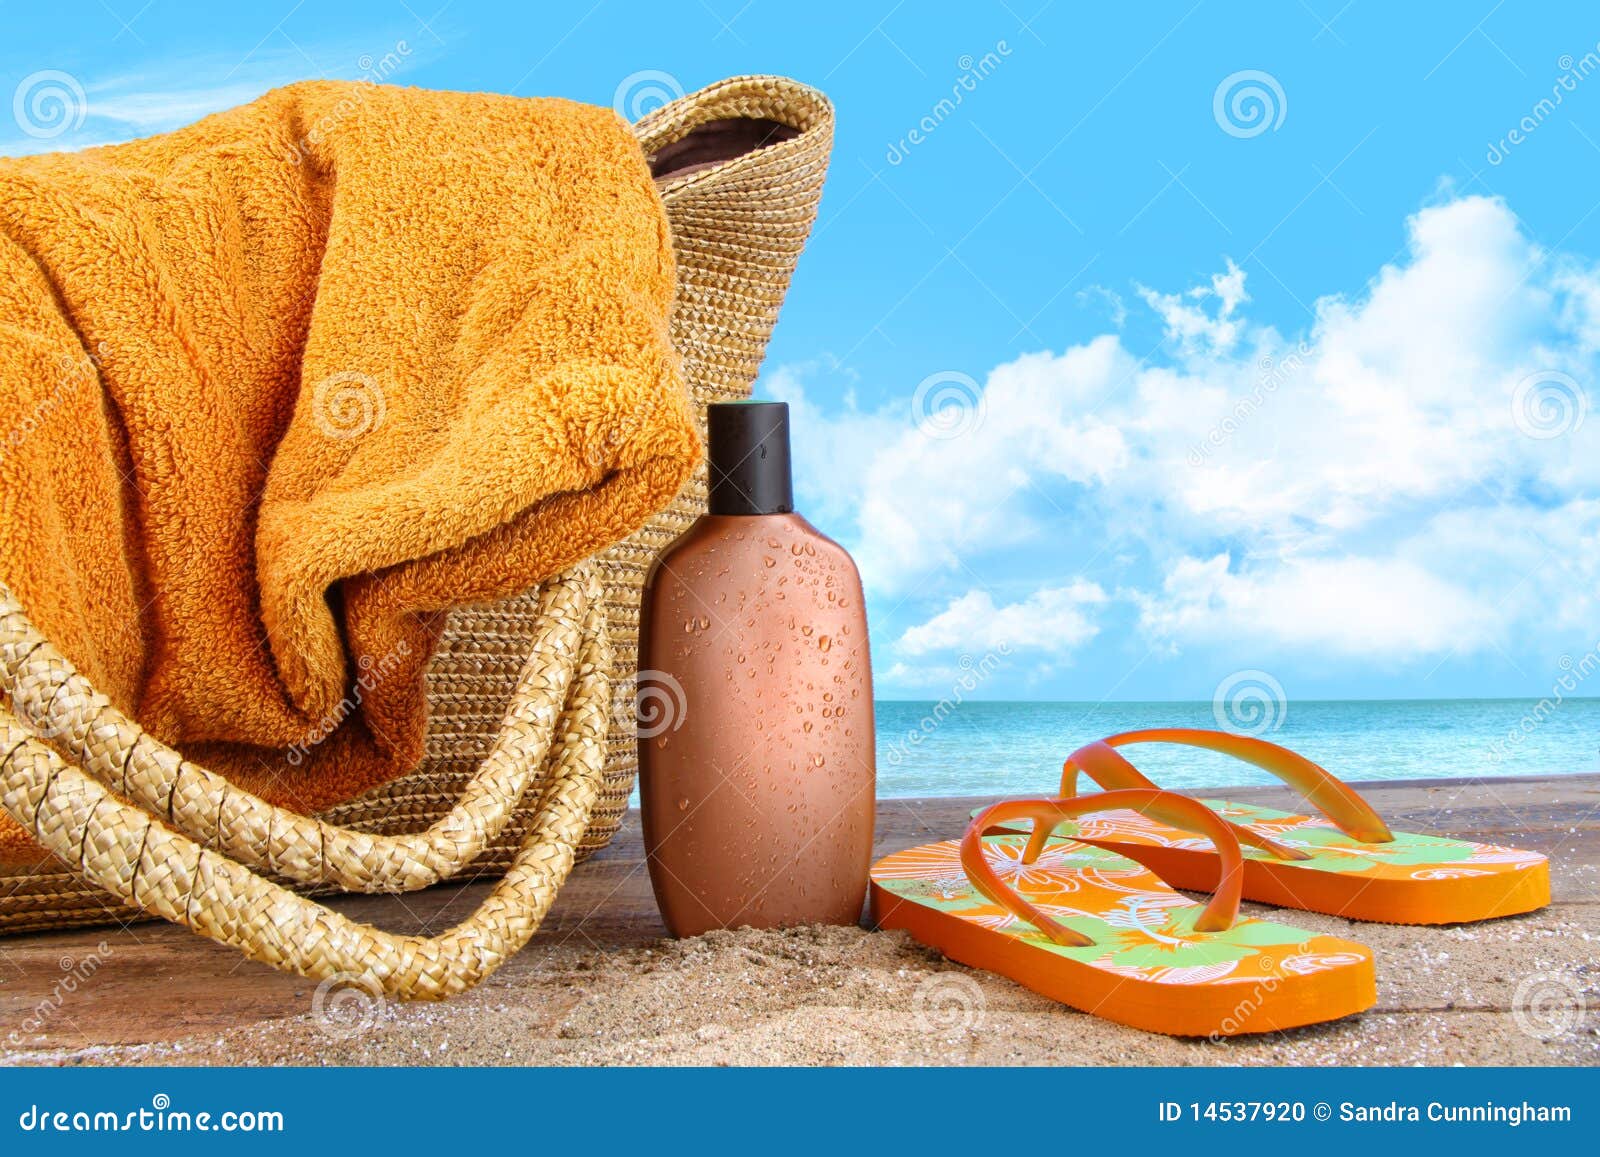 suntan lotion, with towel at the beach